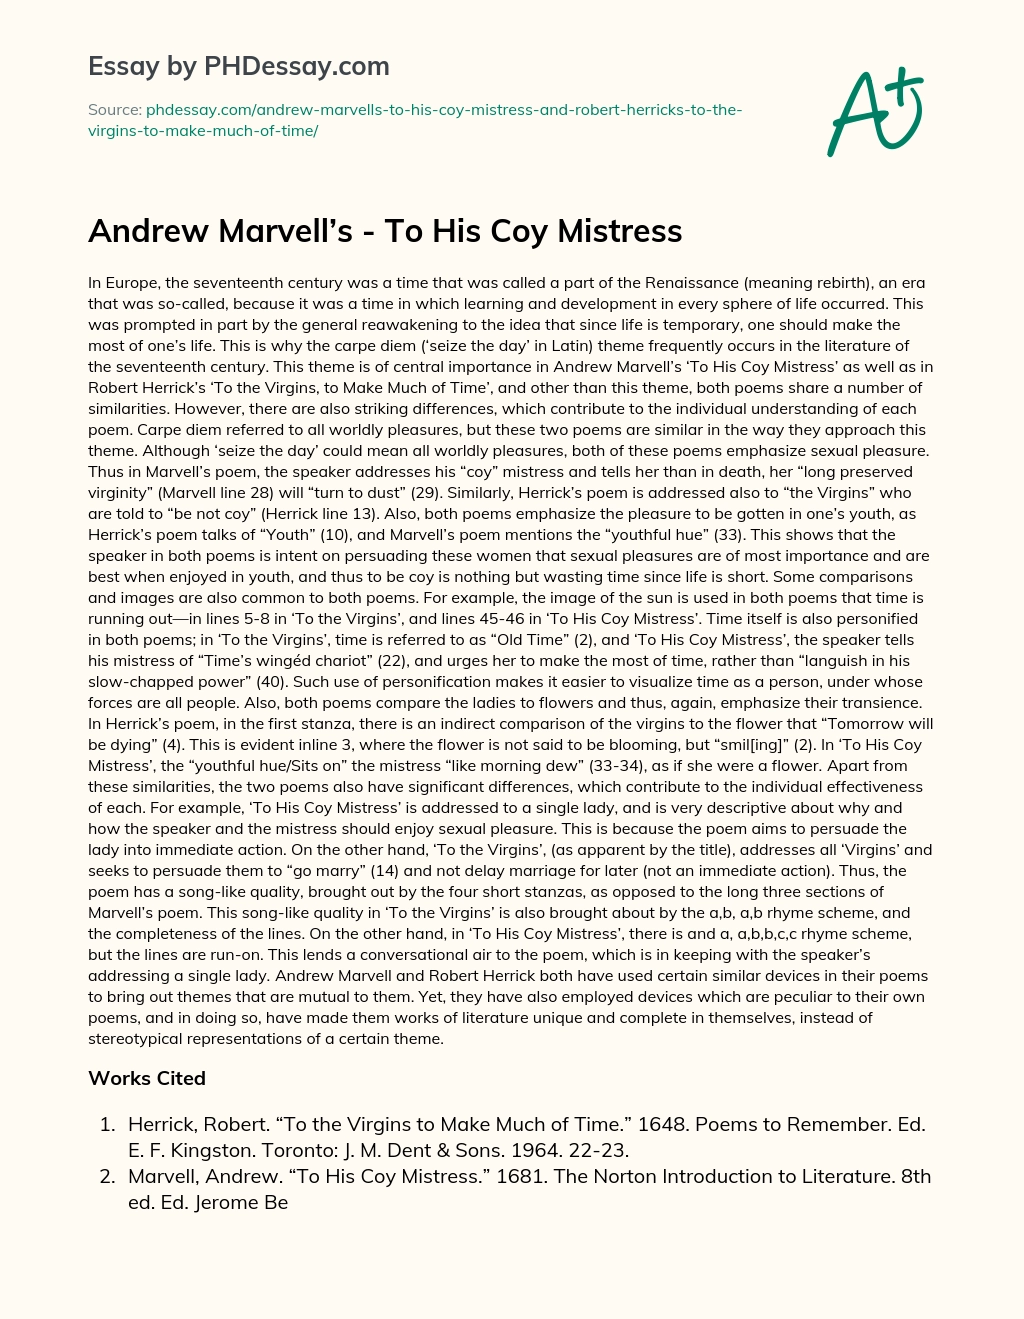 Andrew Marvell’s – To His Coy Mistress essay